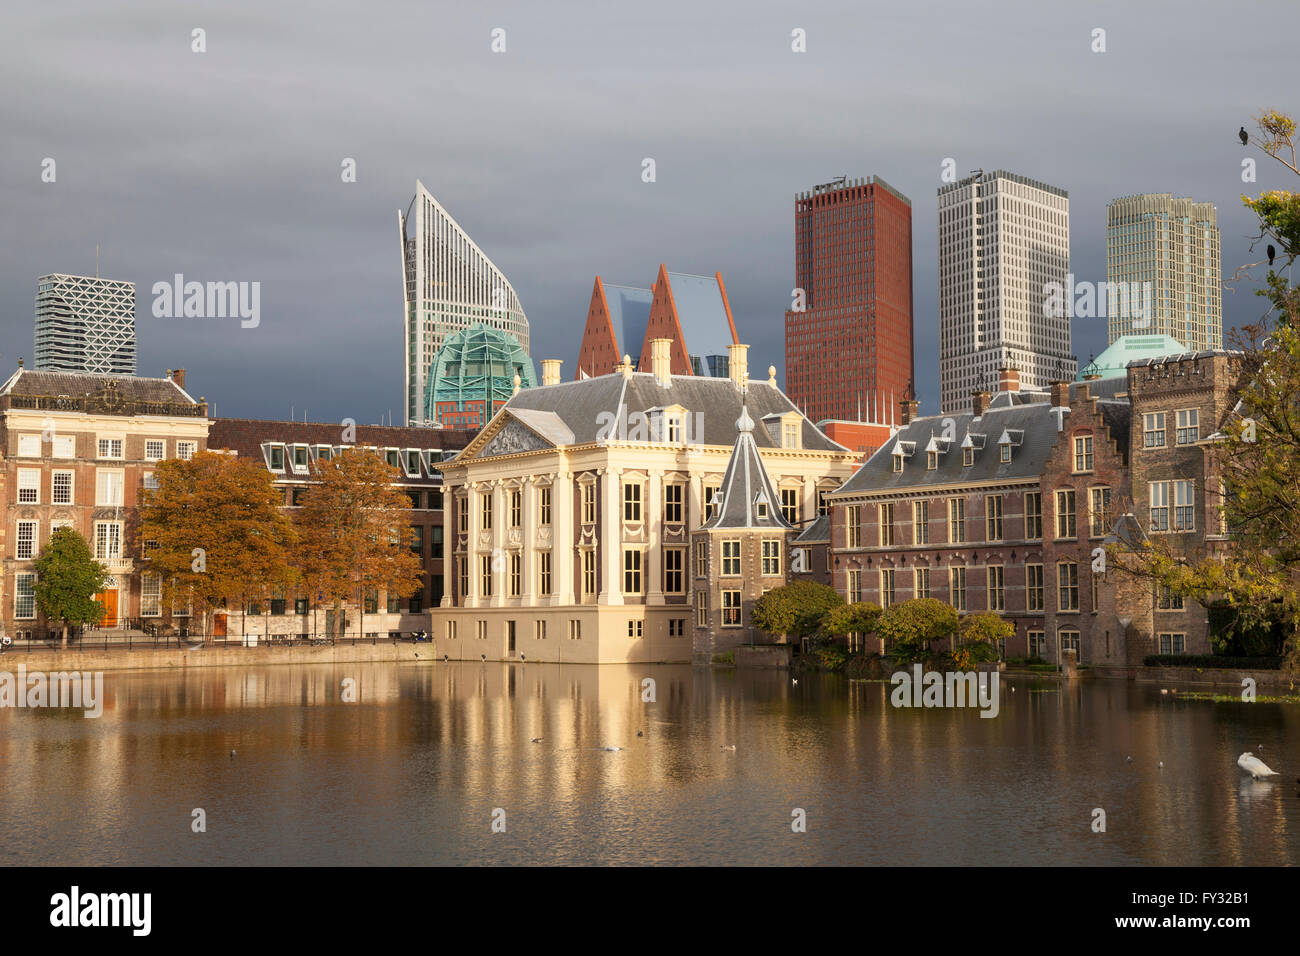 Mauritshuis Museum at the Binnenhof, skyscrapers at the back, The Hague, Holland, The Netherlands Stock Photo